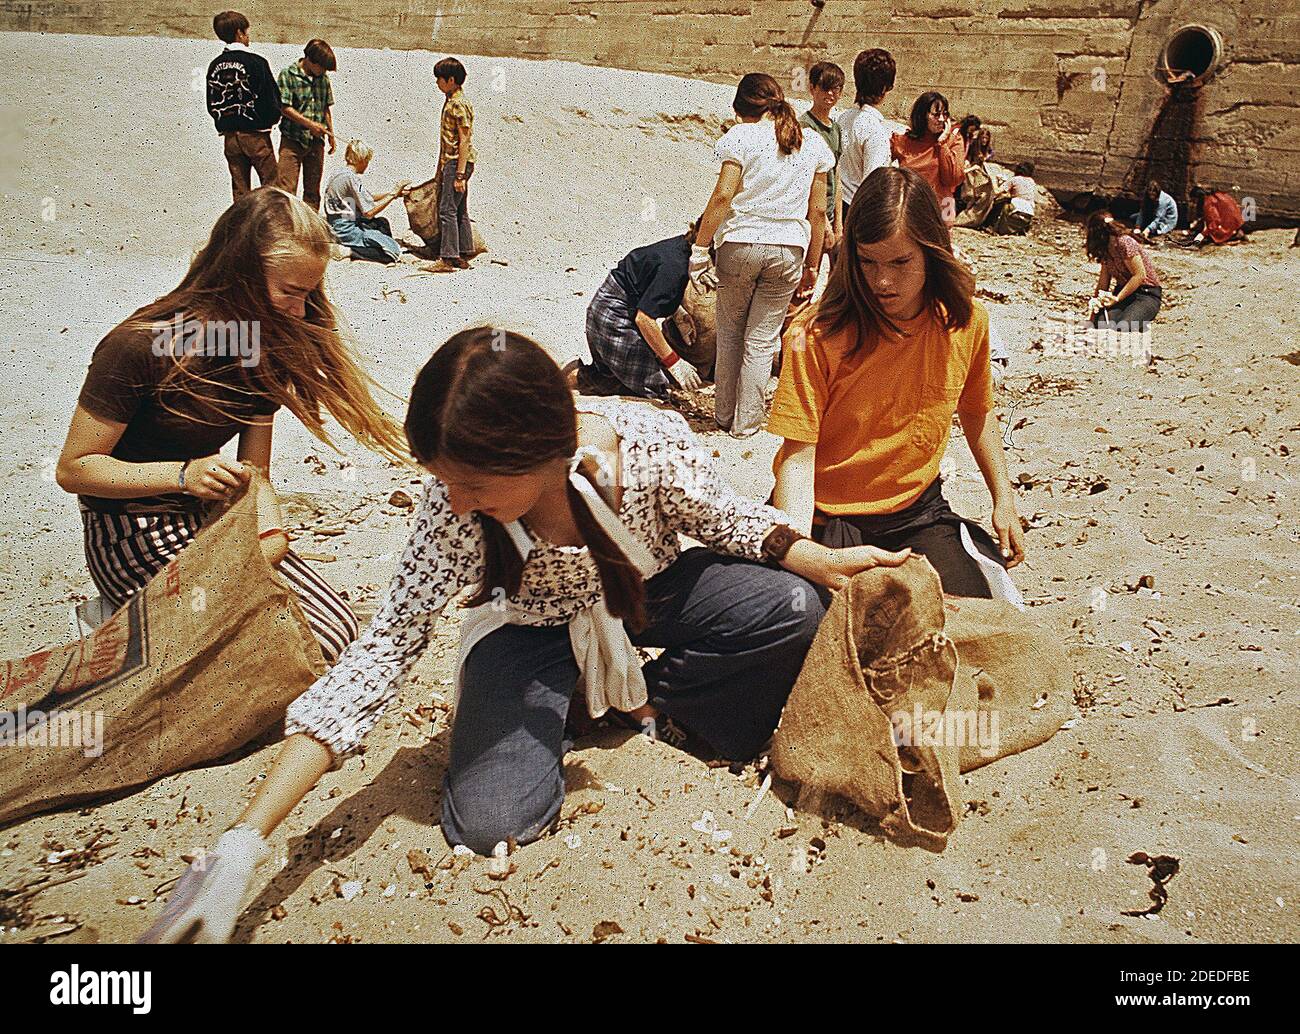 1970s Photos (1972) -  Eighth grade students from st. bonaventure high school spend recess period picking up trash on beach near oil wells Stock Photo